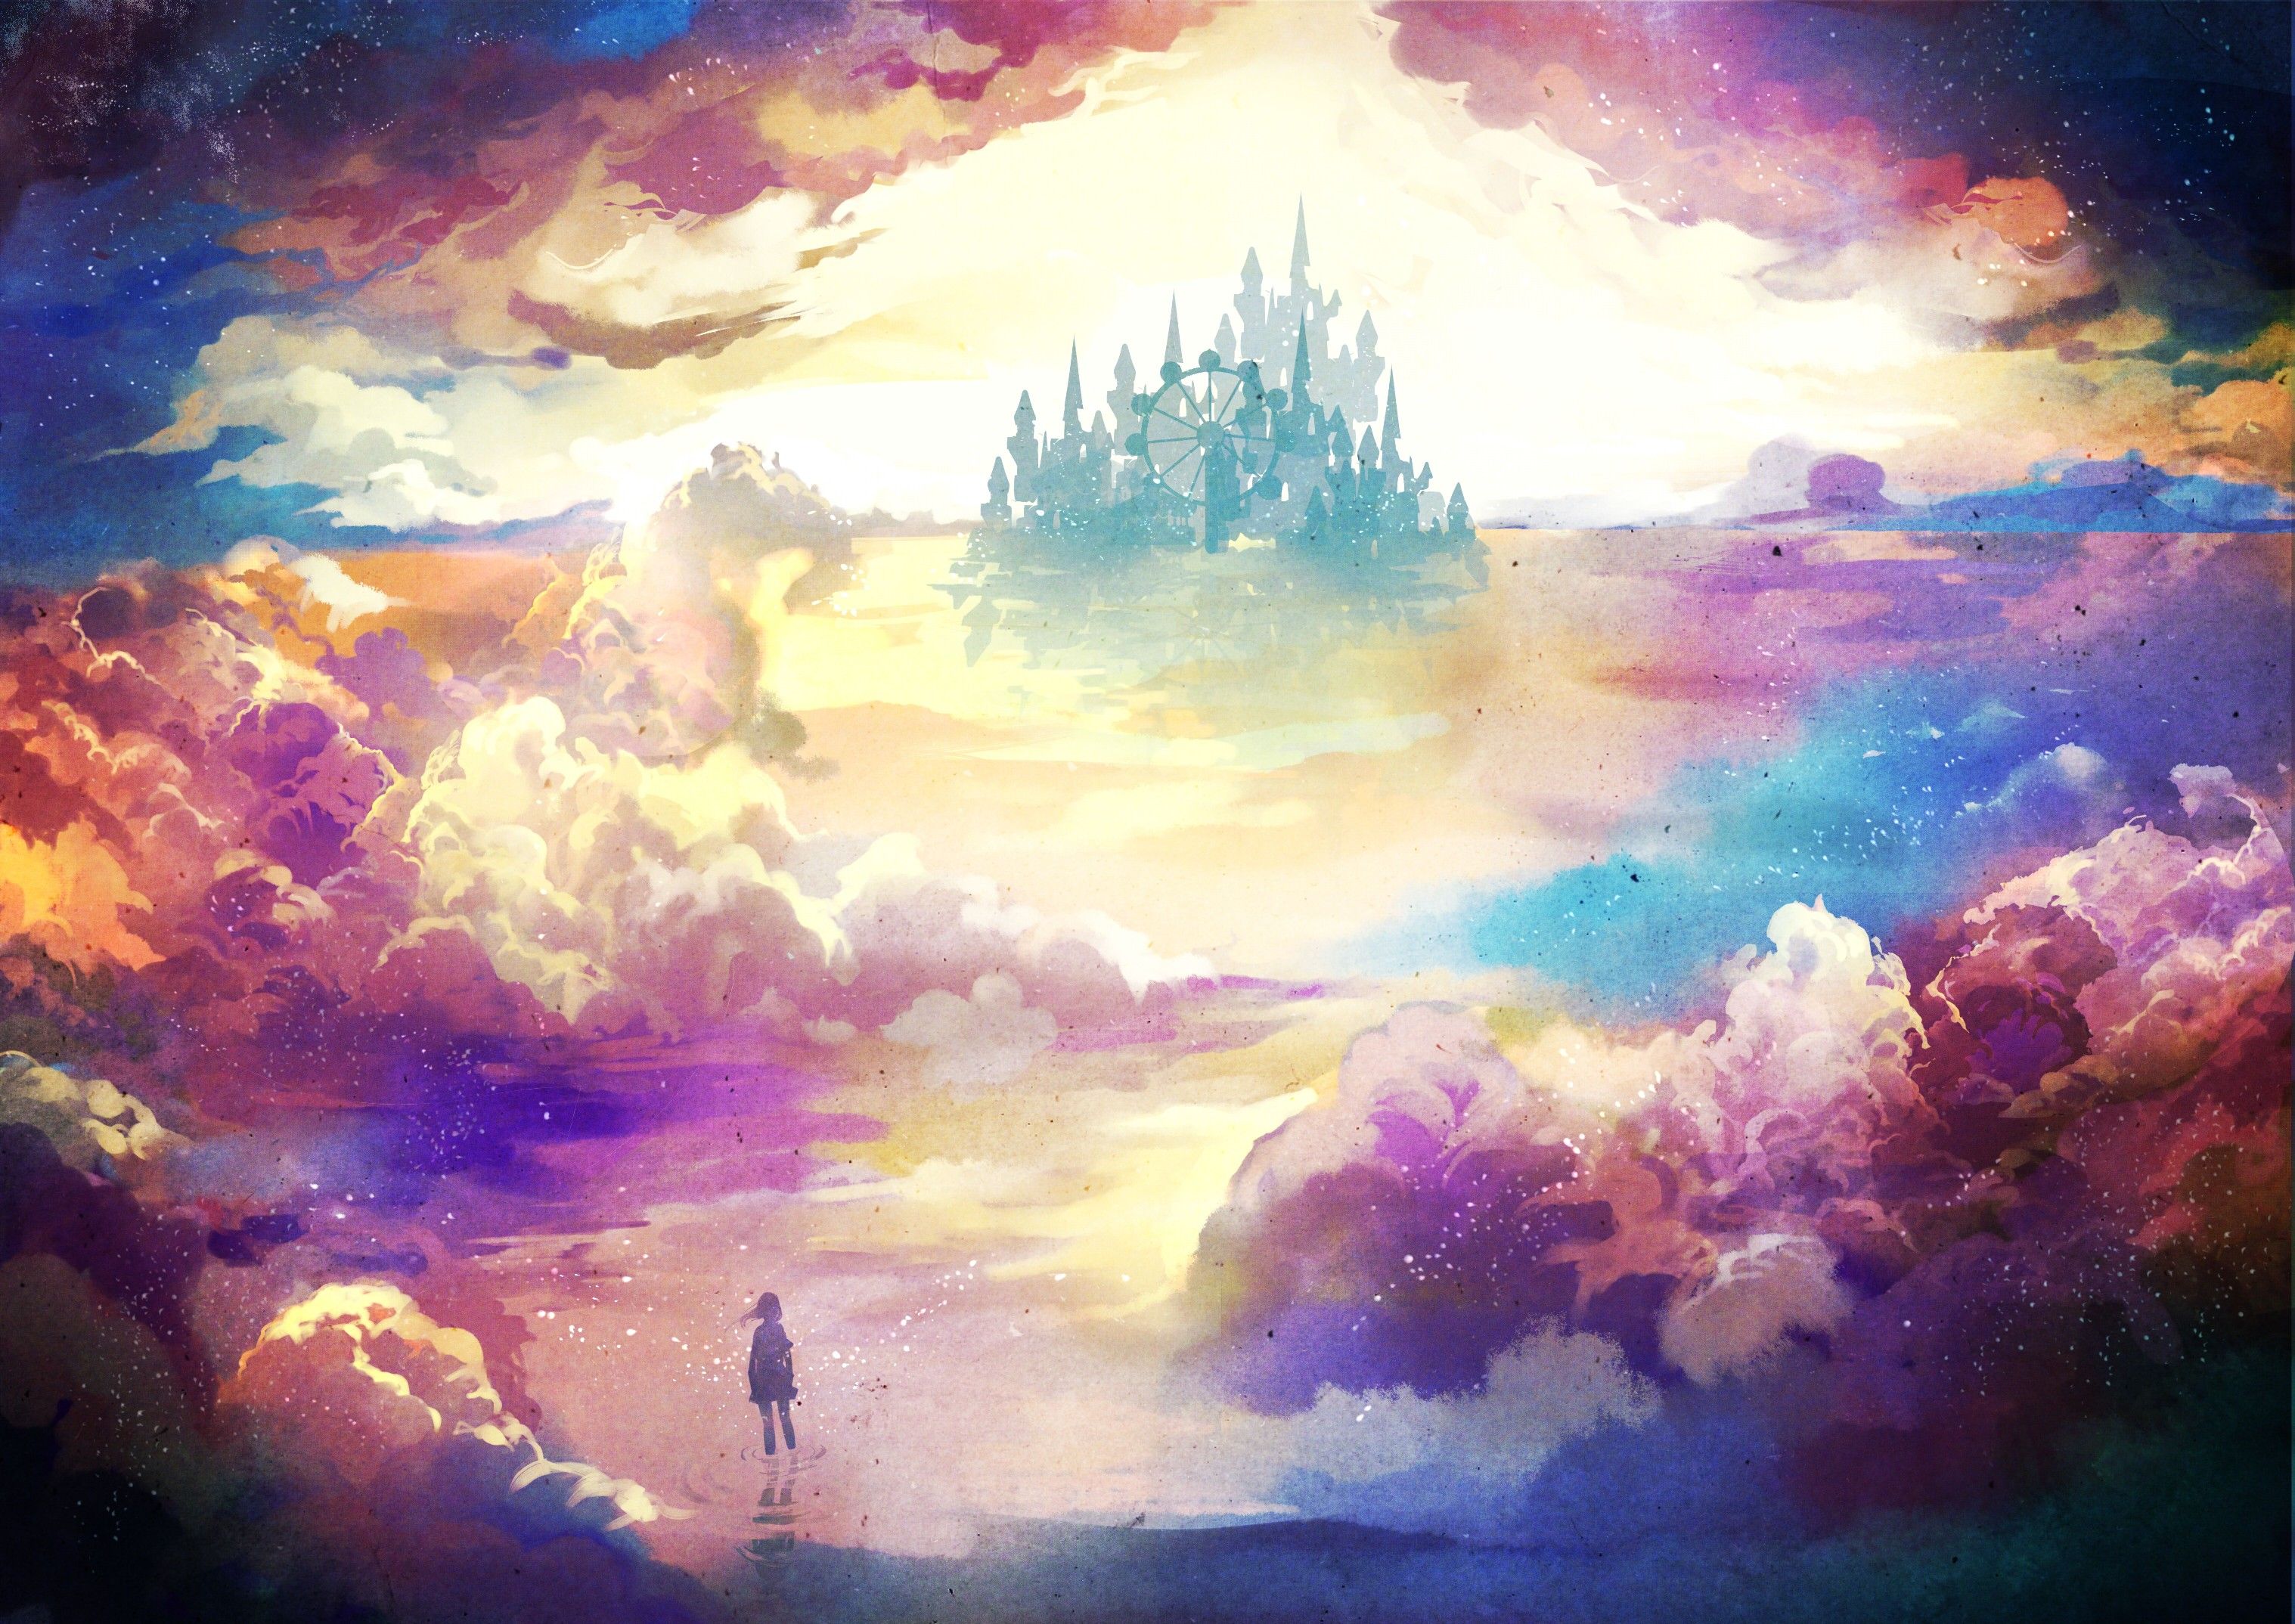 Free Anime Fantasy Landscape Wallpaper High Definition at Cool